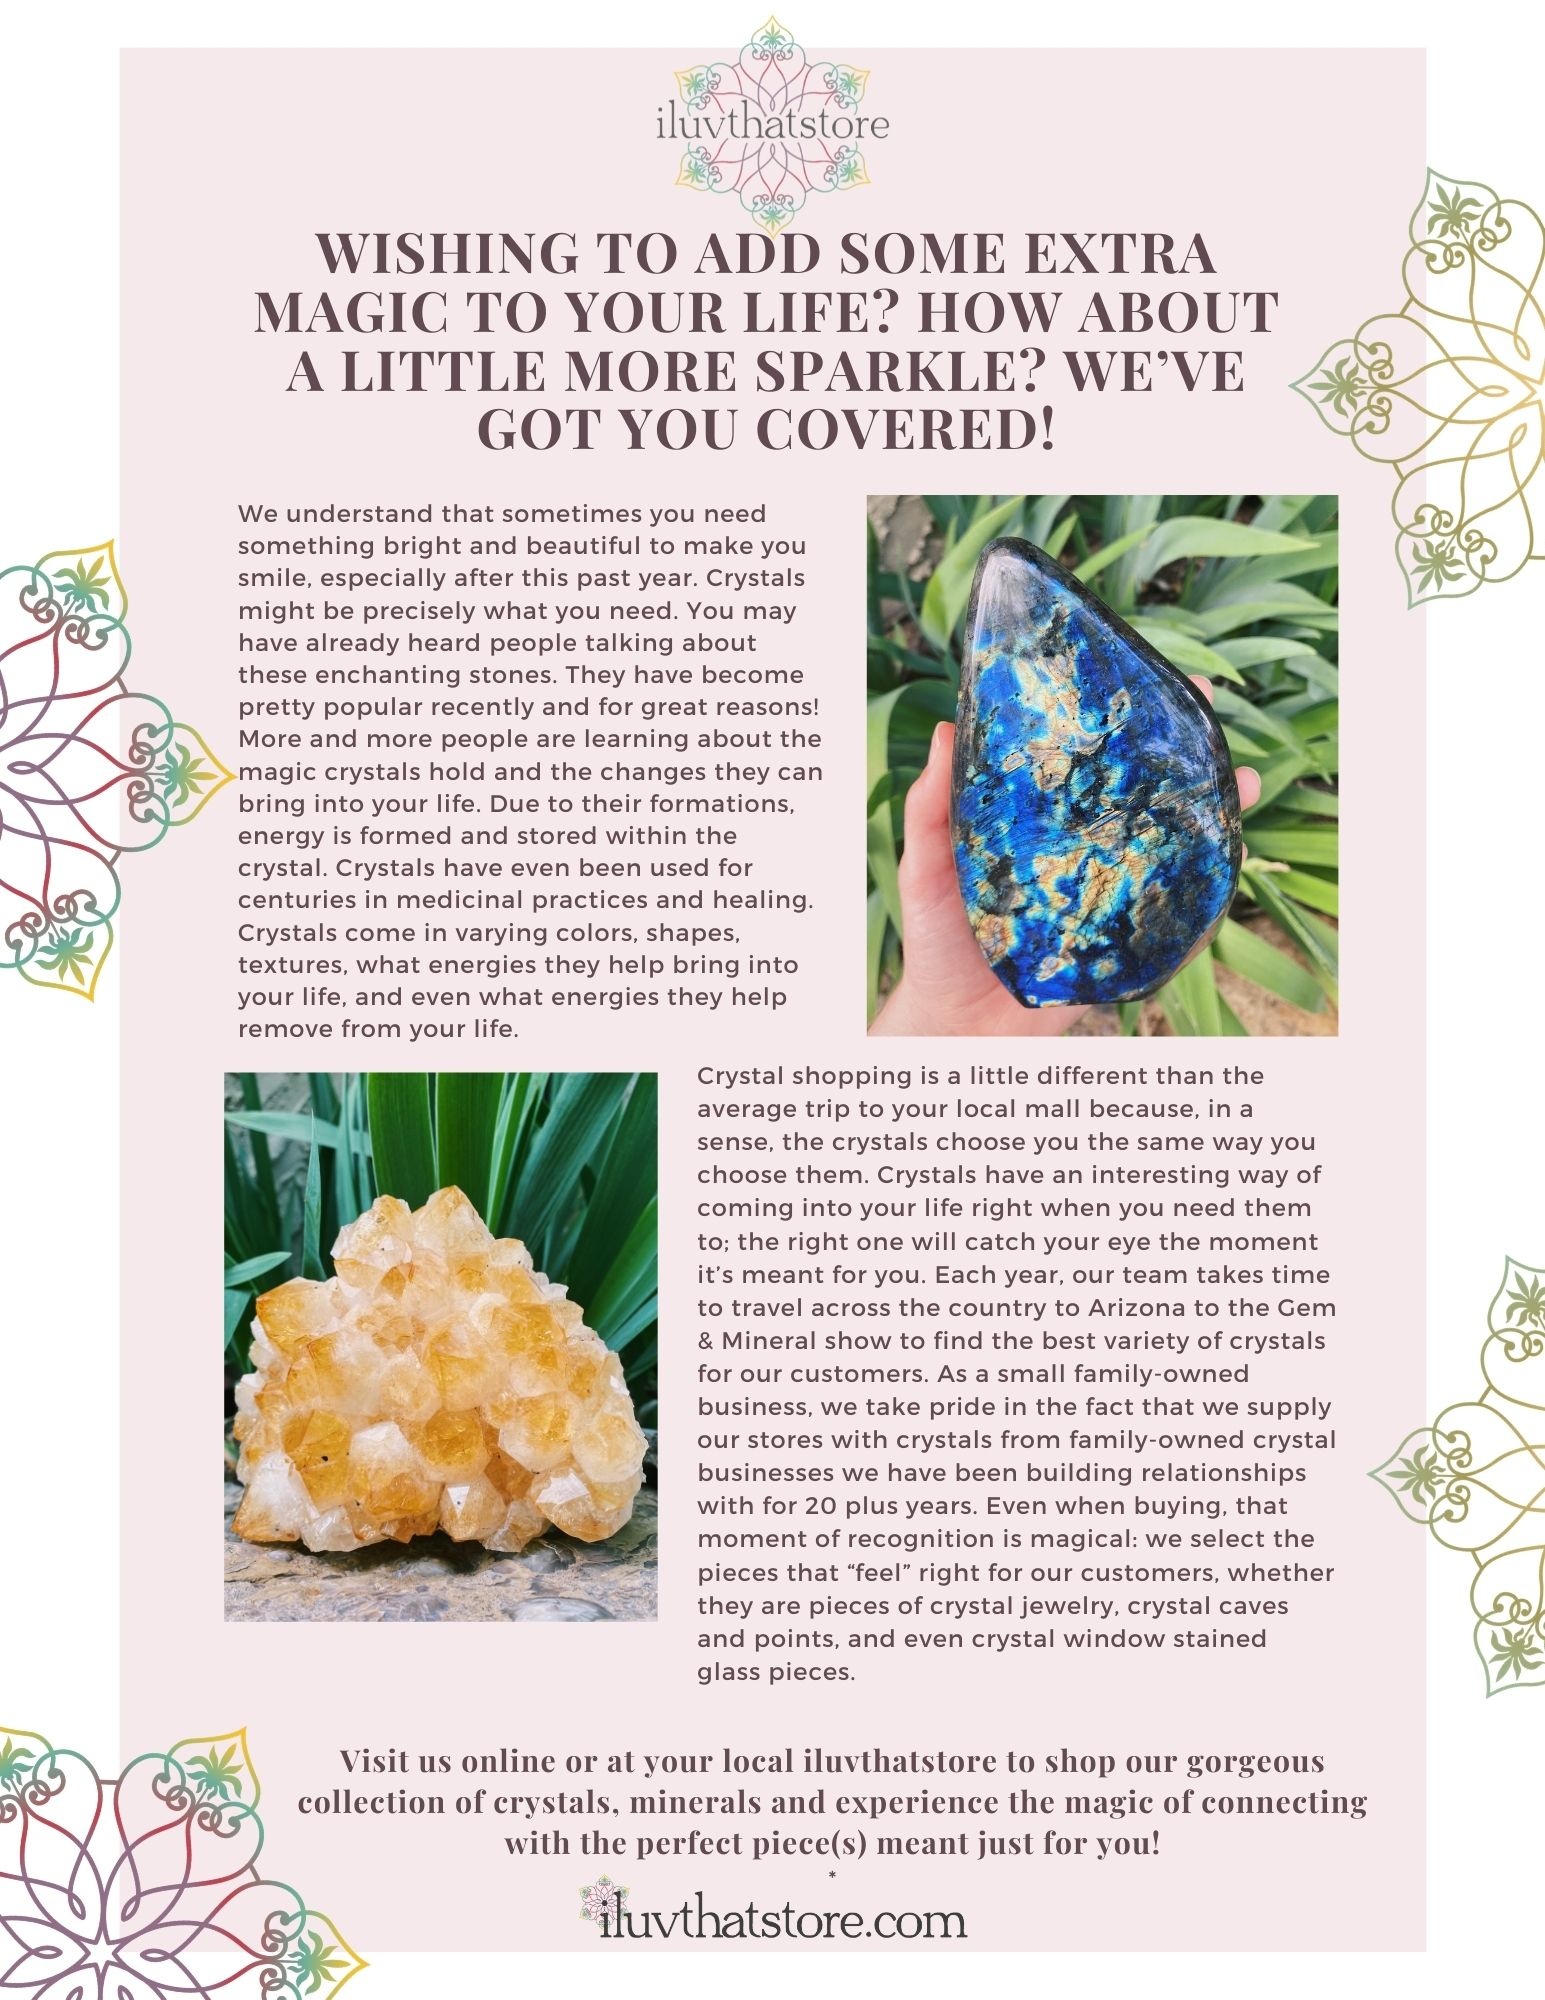 Simple pink and white minimalistic graphic with mandalas and photos of stunning citrine and labradorite crystals and gemstones. Descriptive text about our search for the perfect stones out West, and how to trust in what crystals are calling for you.